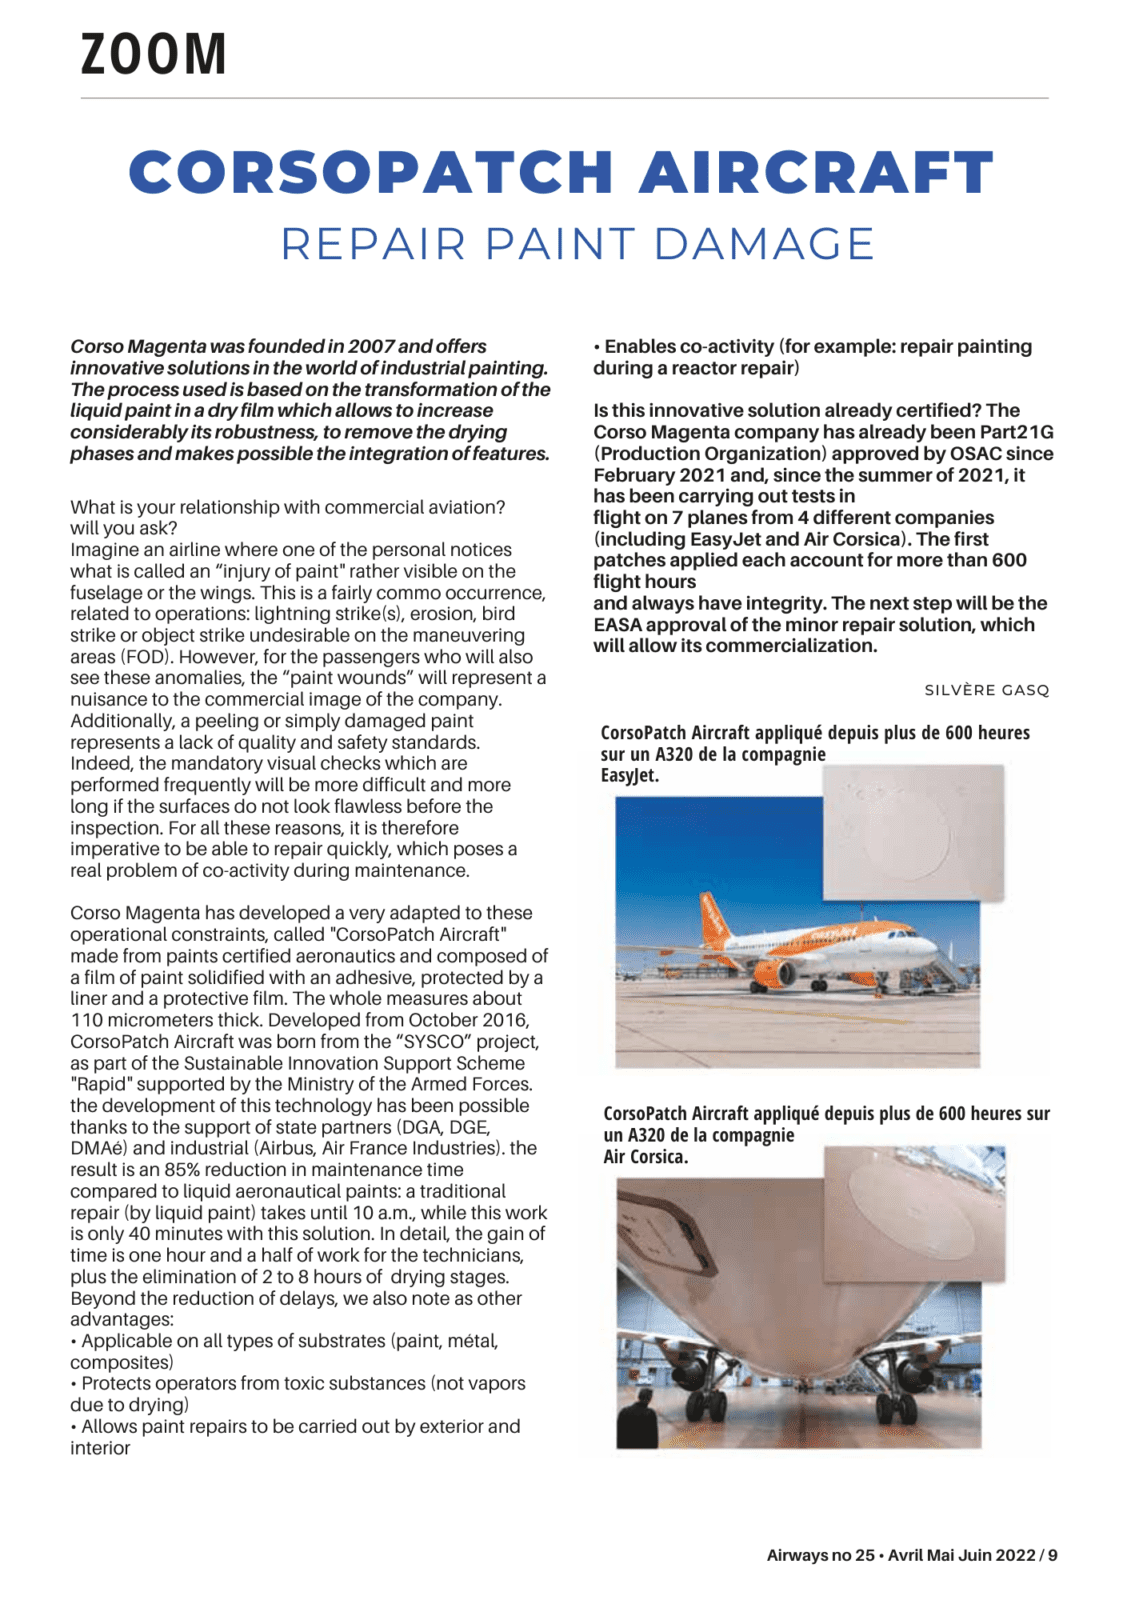 Airways Aircraft MRO EASA Fly test Air Corsica Easy Jet Fast paint repair, Airways magazine talks about CorsoPatch